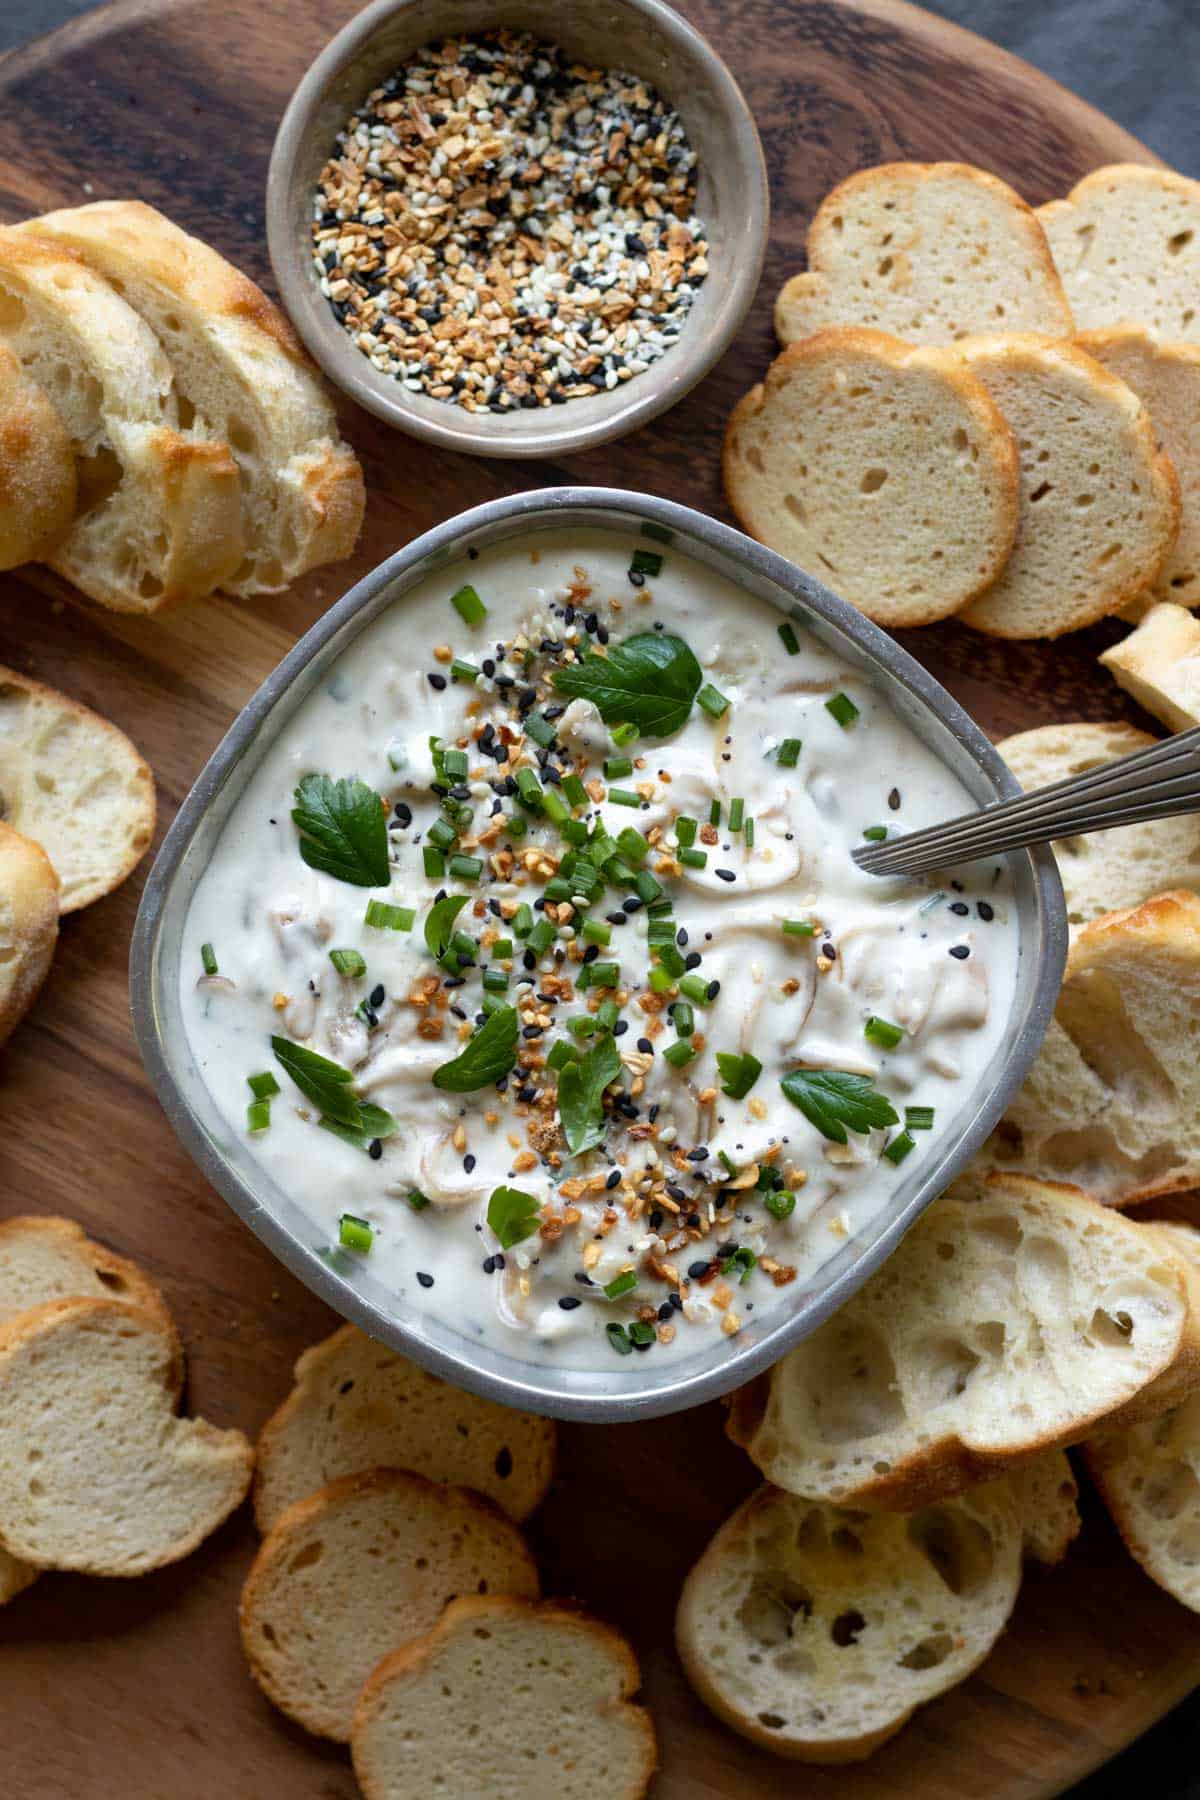 vegan onion dip in a small silver serving bowl garnished with parsley.